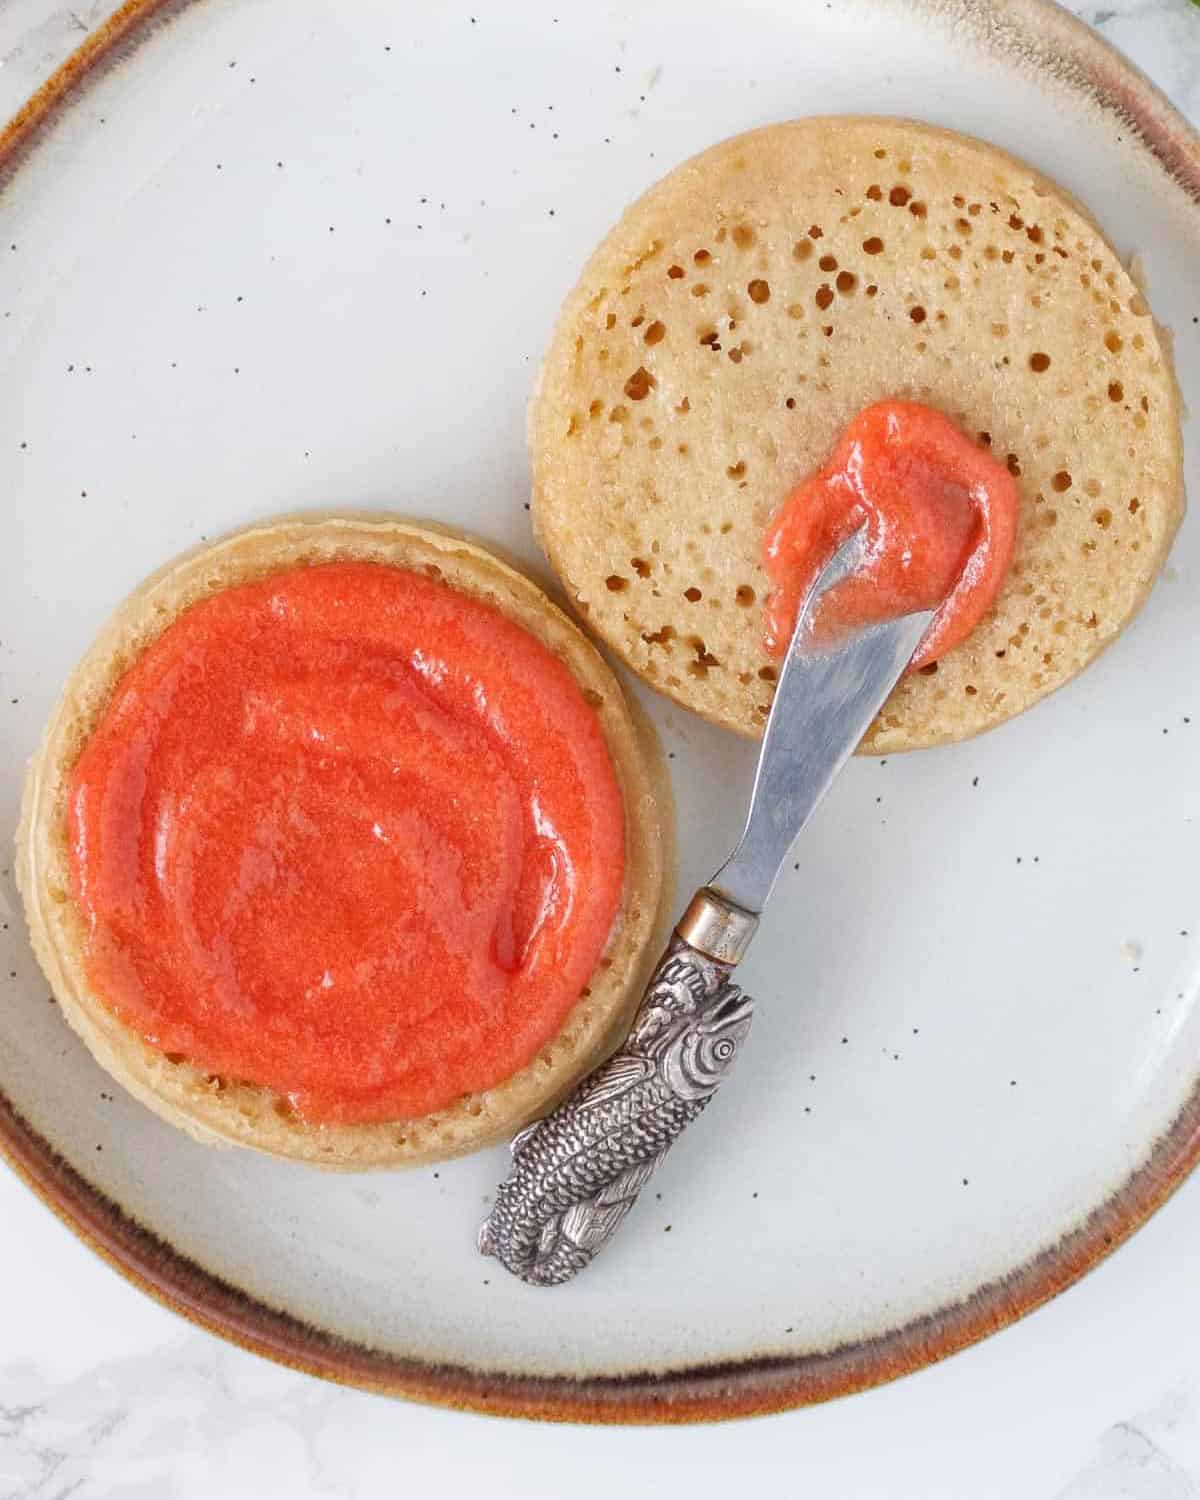 Crumpet with guava jam.